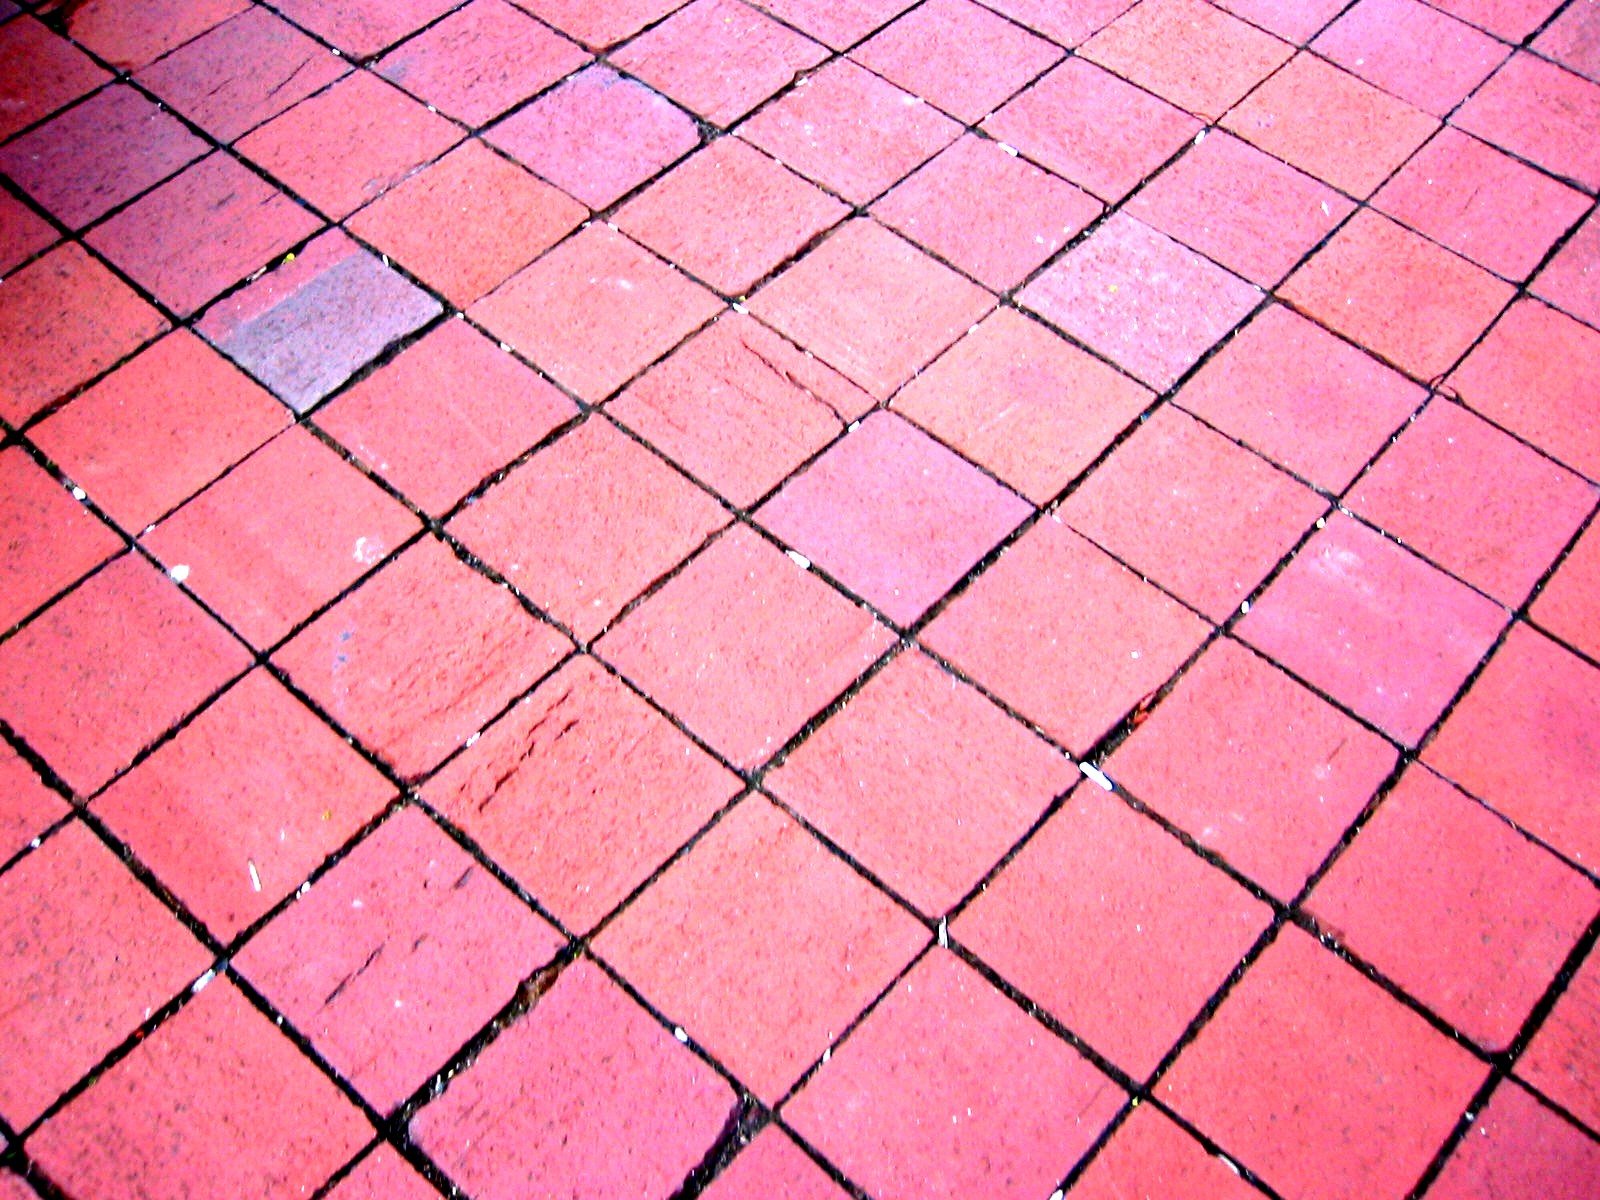 red bricks laid out on the ground in a brick pattern